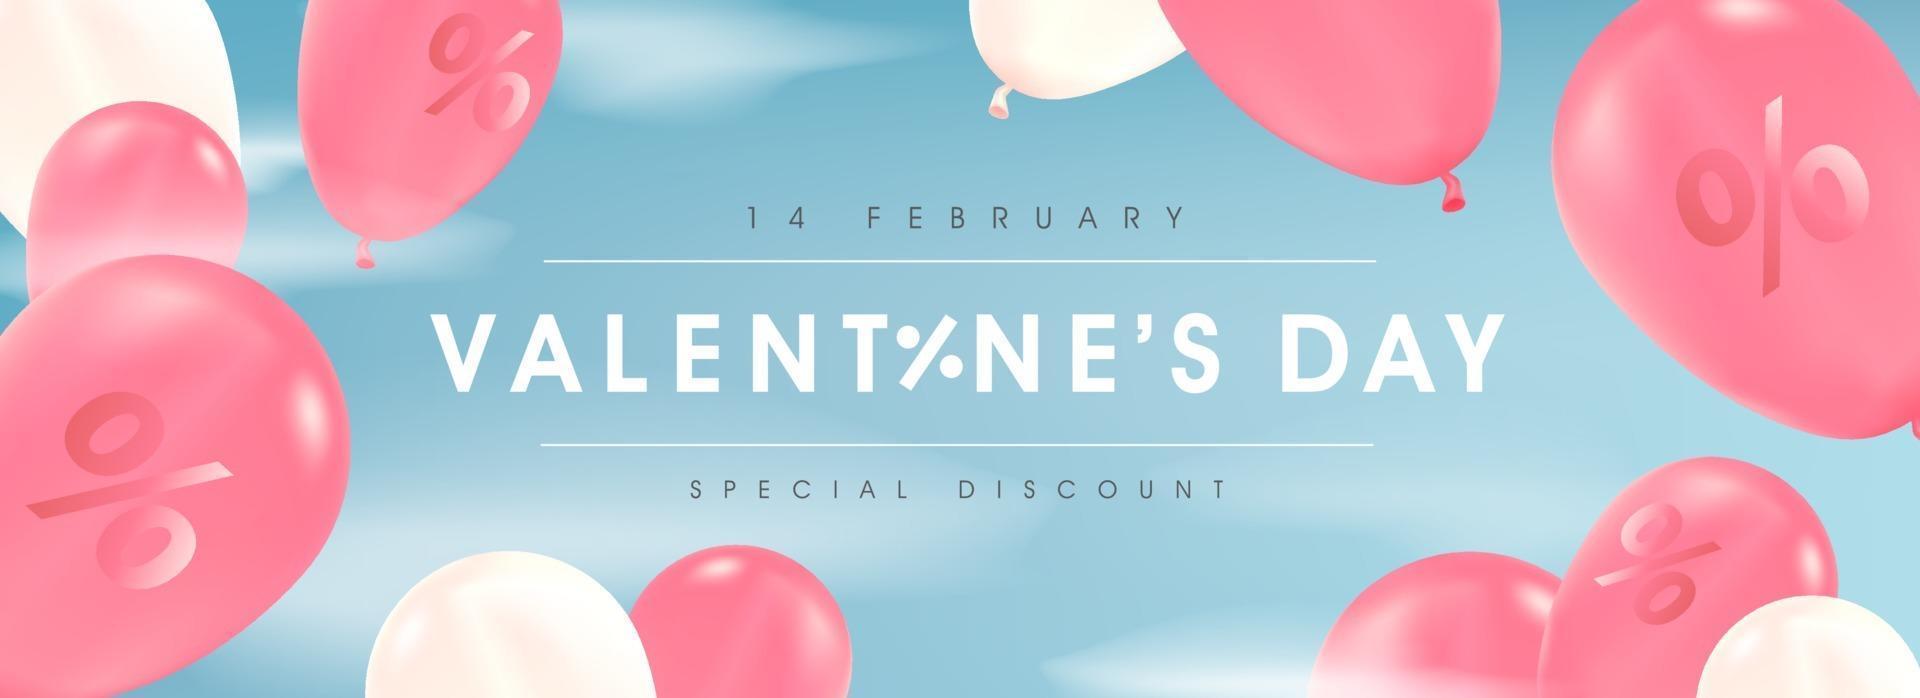 Valentine's day sale poster or banner with balloons. vector